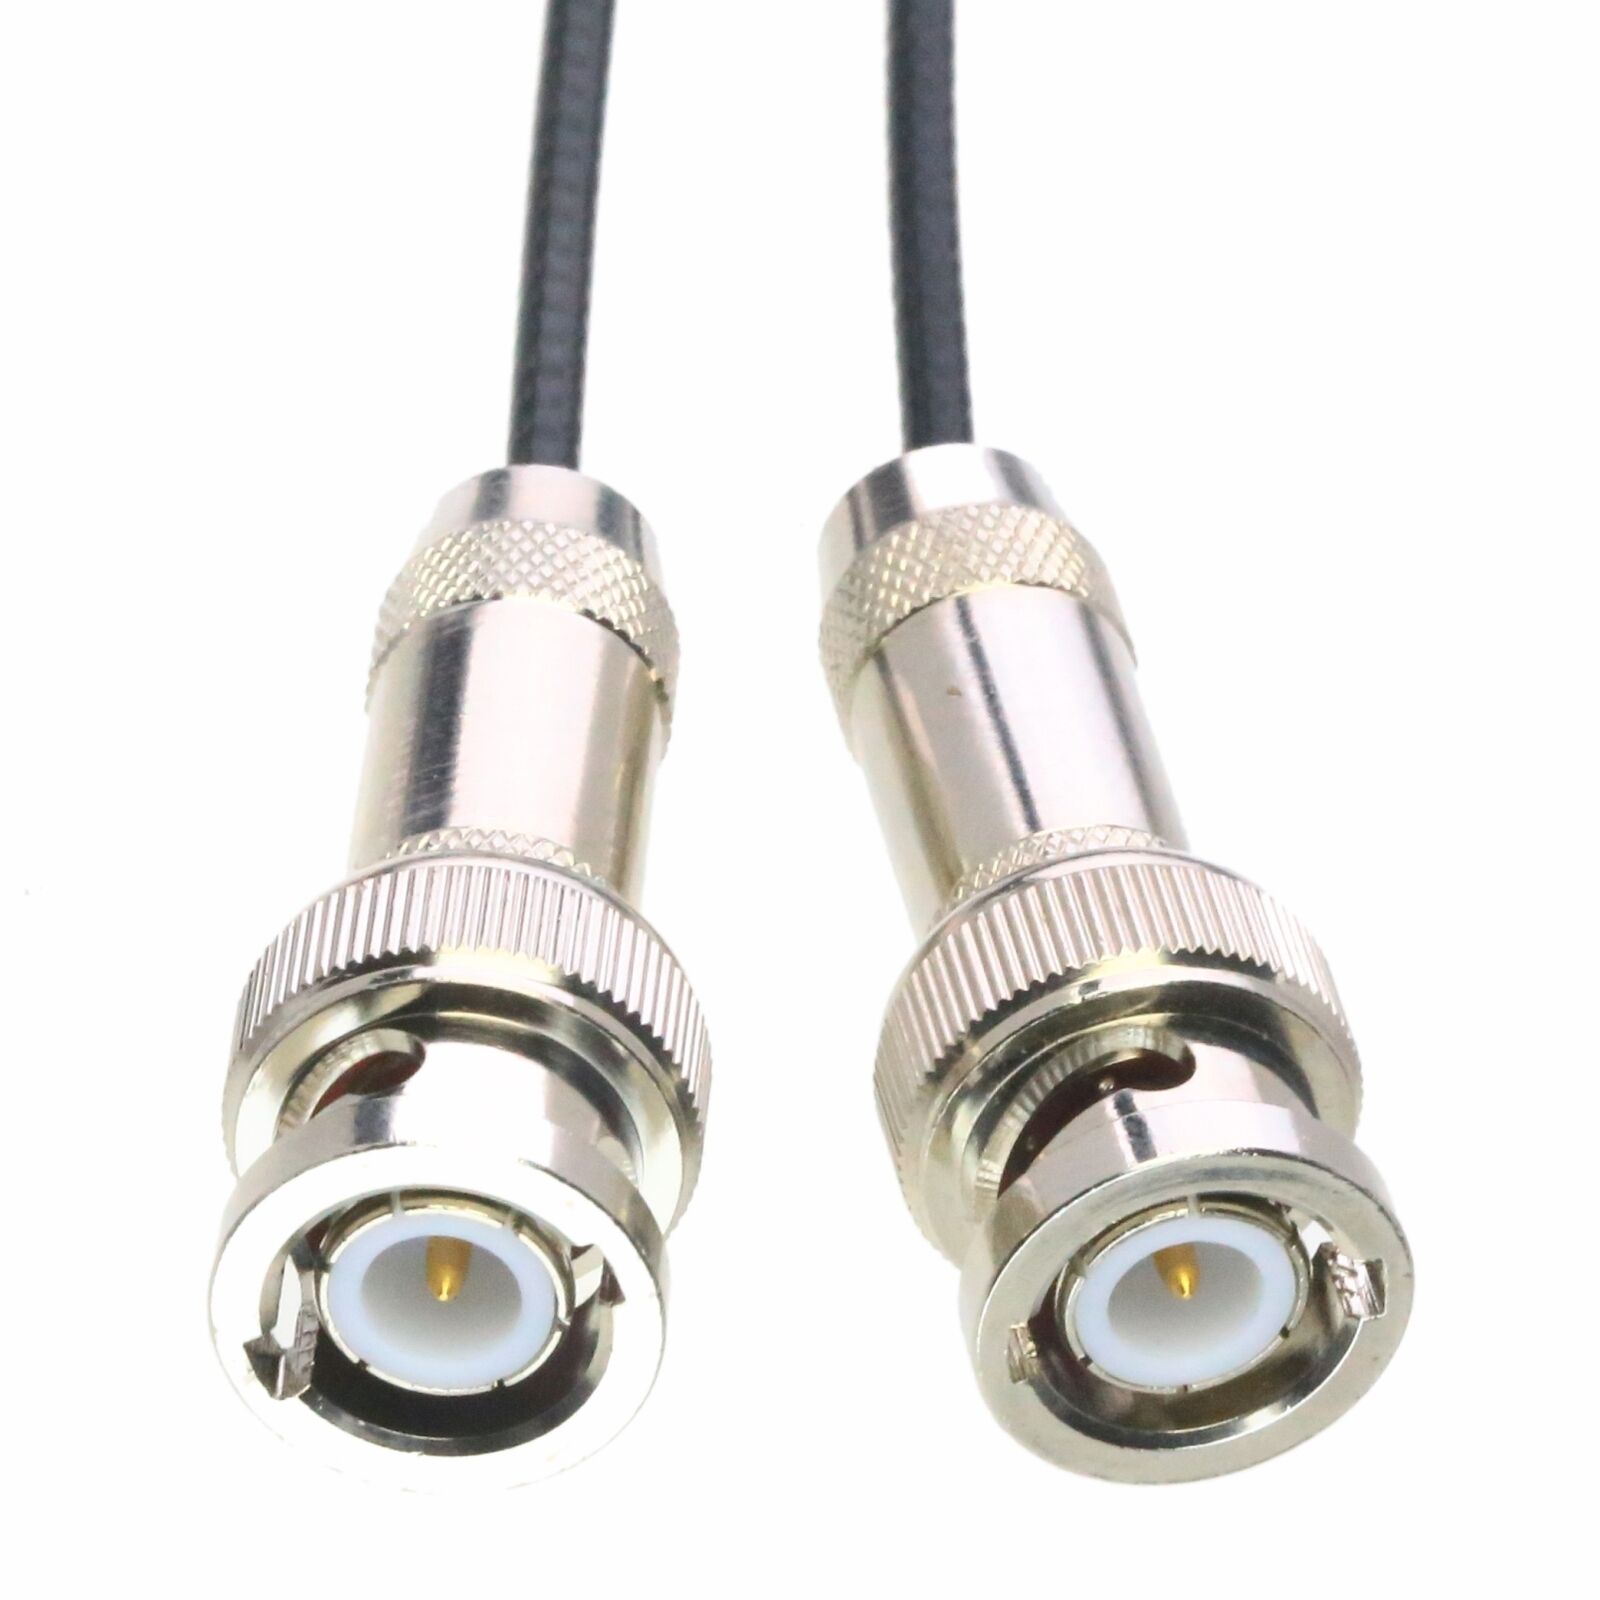 Bnc To Bnc Rf Cable 118-140-016/021 For Sws And Aws Type Angle Beam Transducers